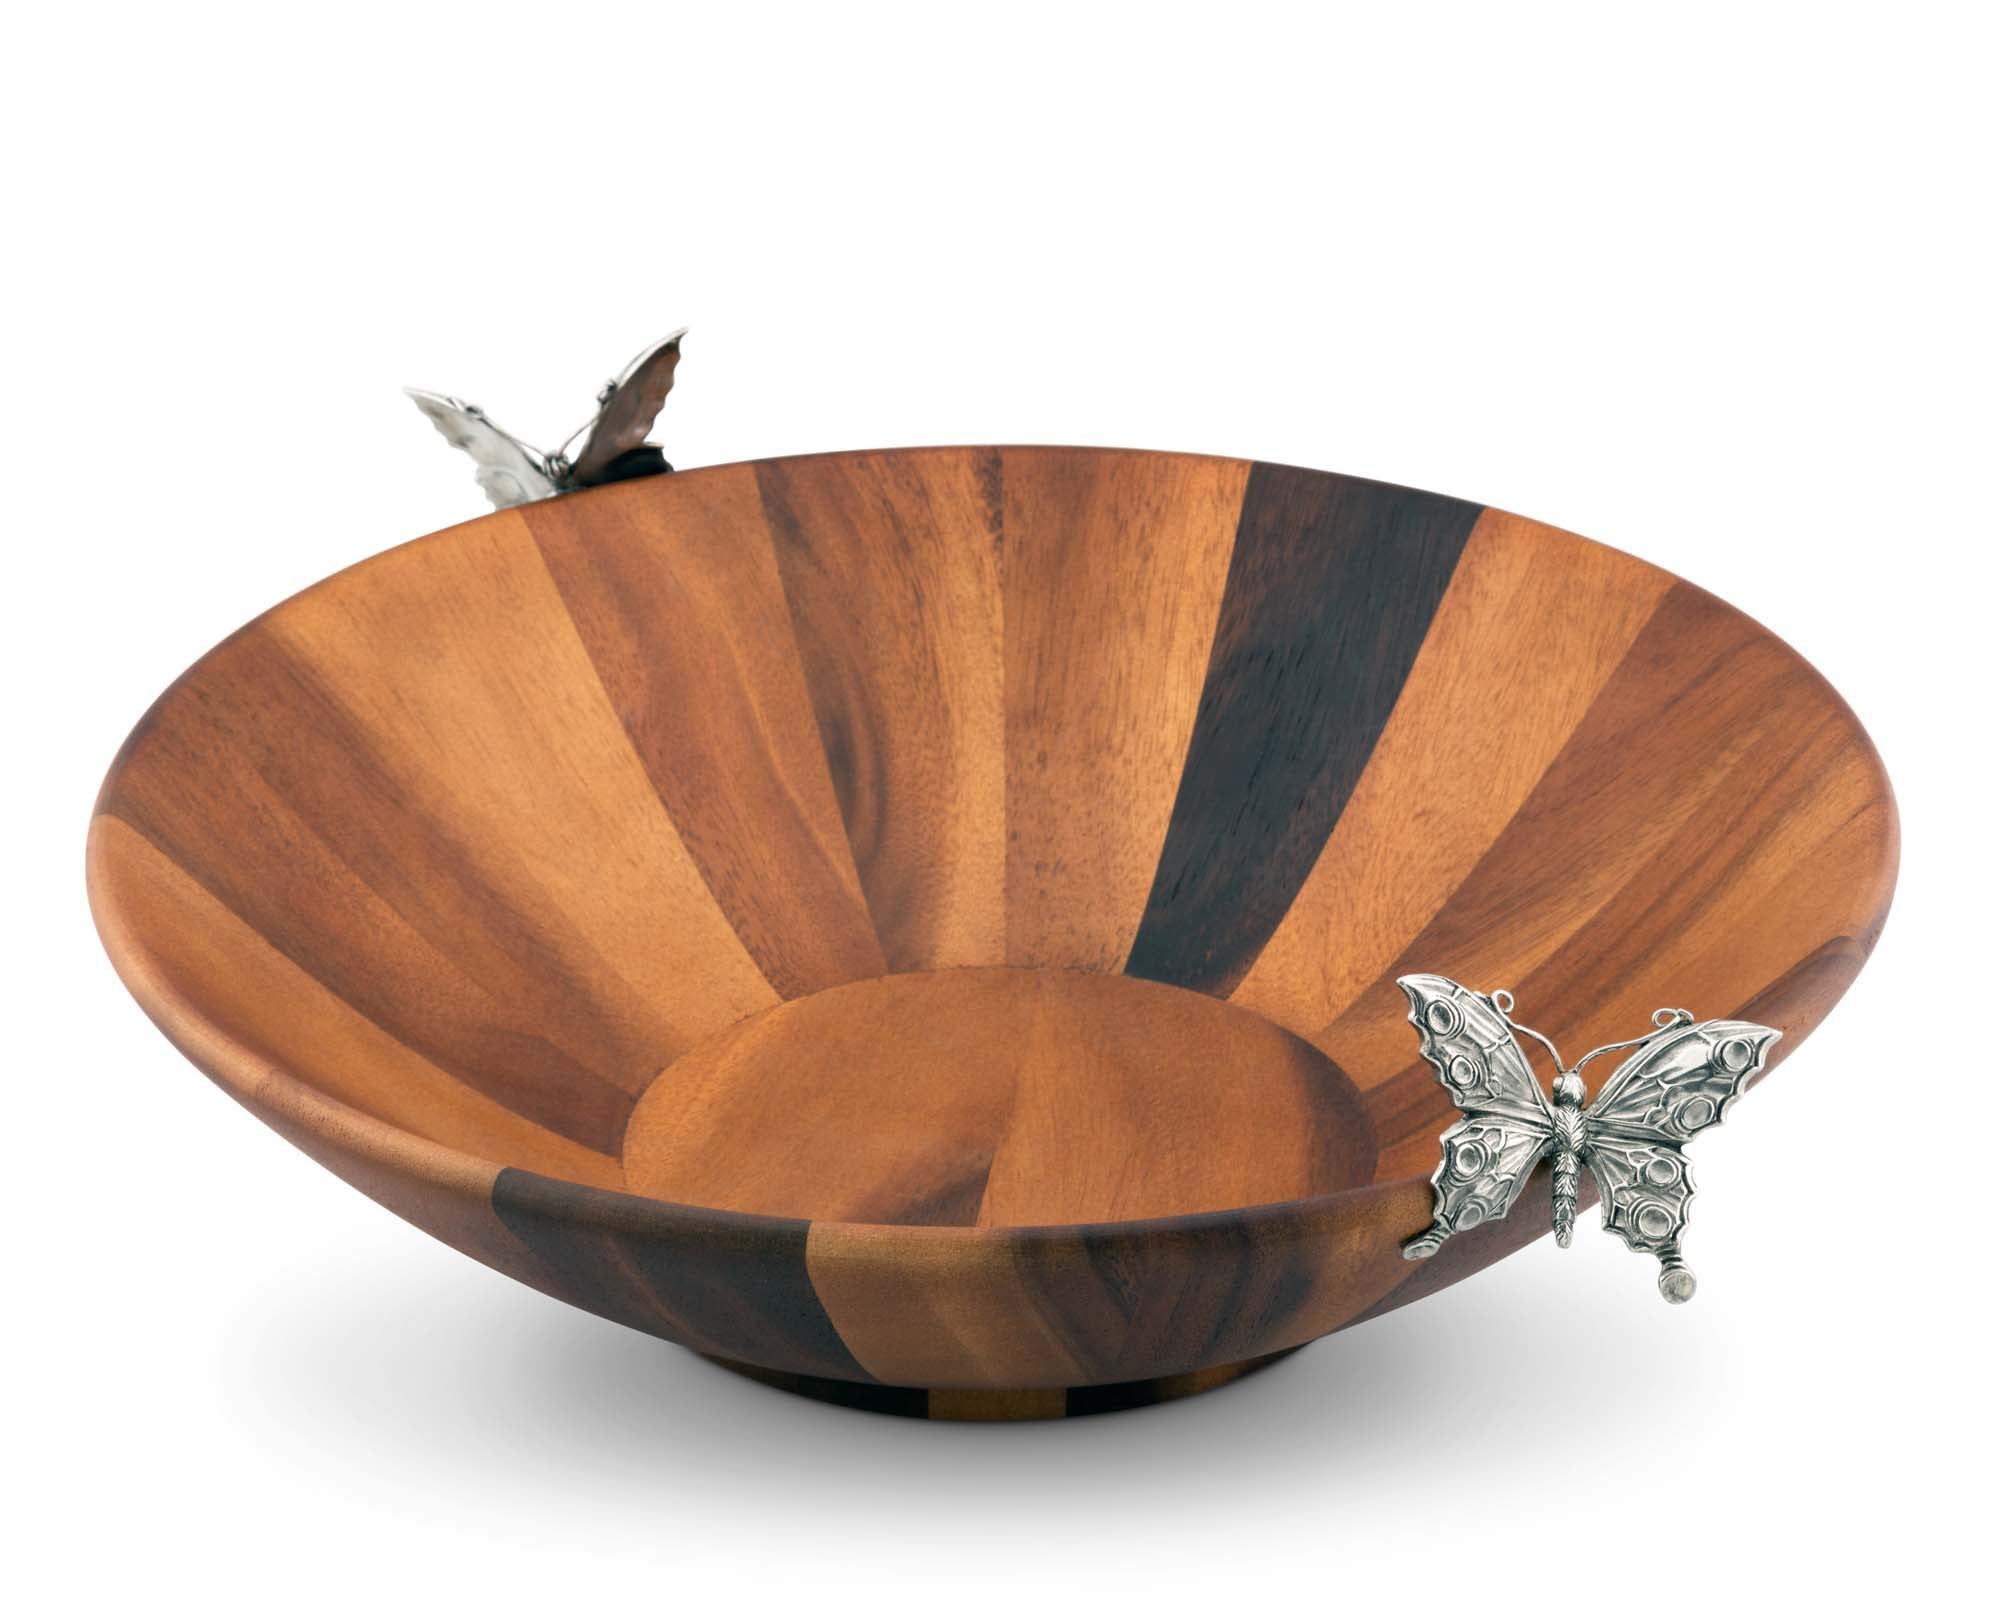 Vagabond House Butterfly Salad Bowl Product Image